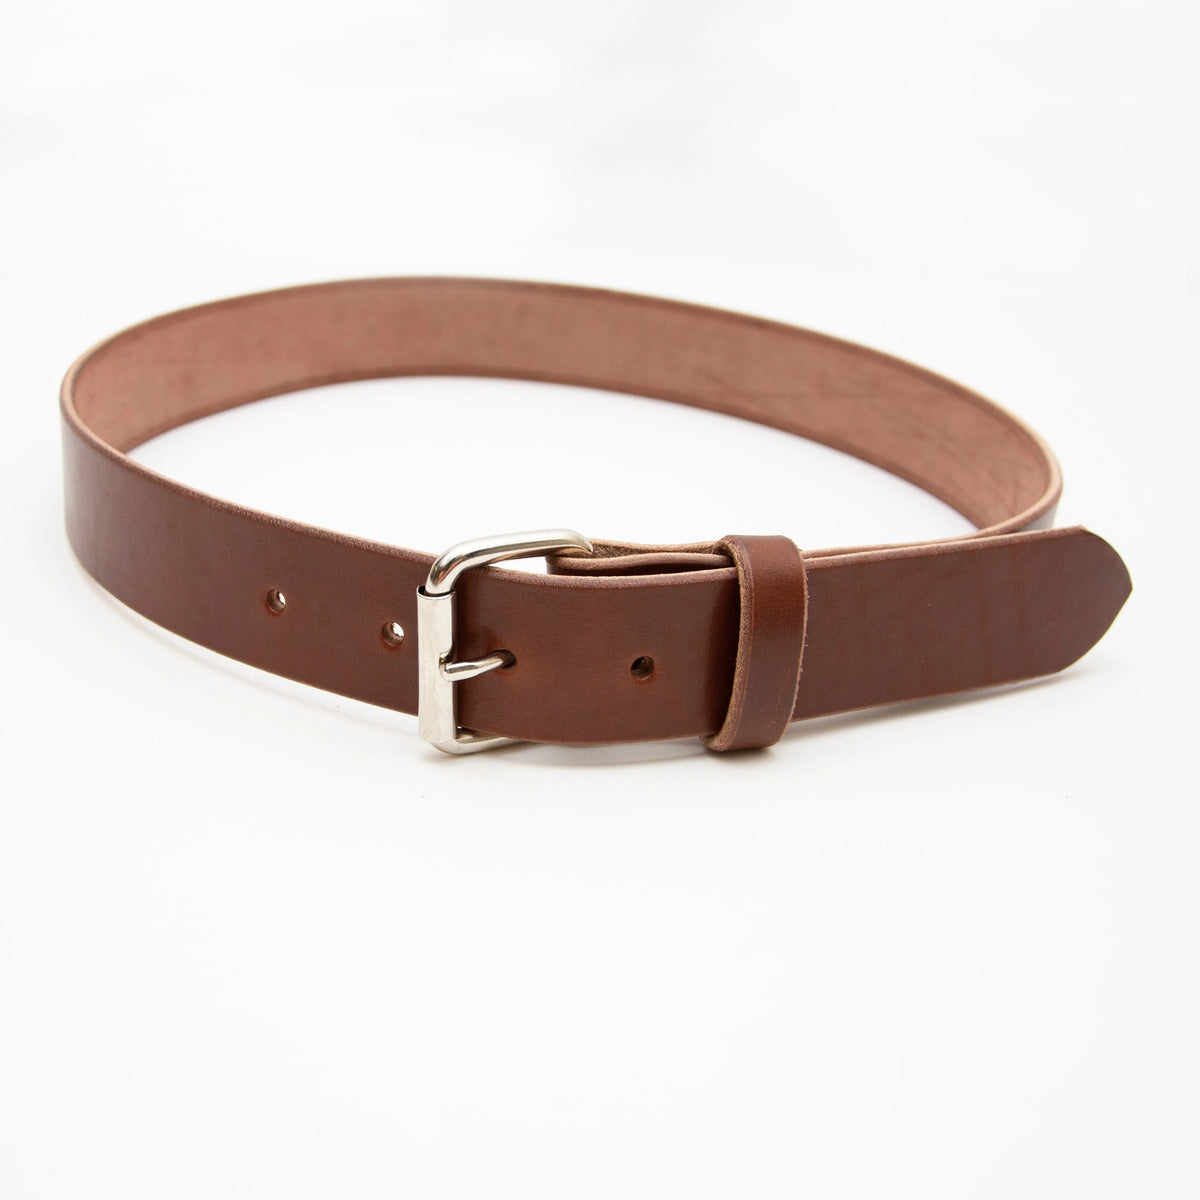 Wasted Leather Made in USA Heavy Duty Belt - All American Clothing Co